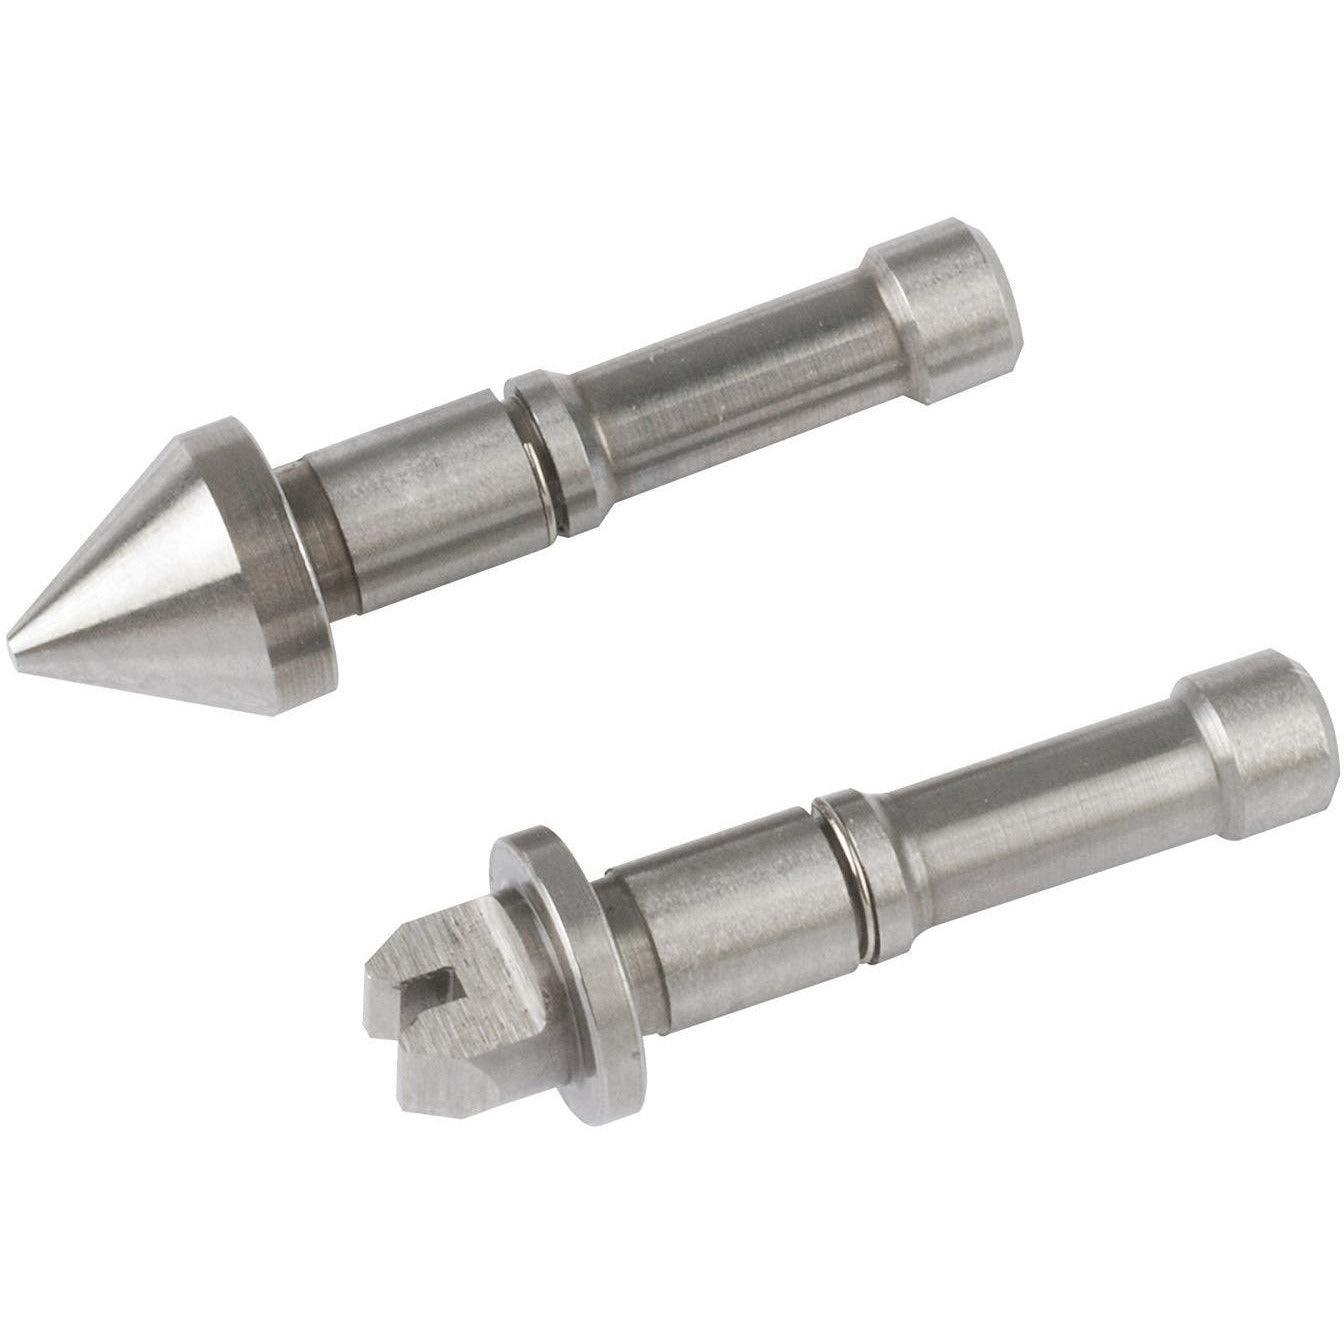 Mitutoyo Anvil and Spindle Tip 1-1.75mm/24-14TPI-Mitutoyo-Tool Factory